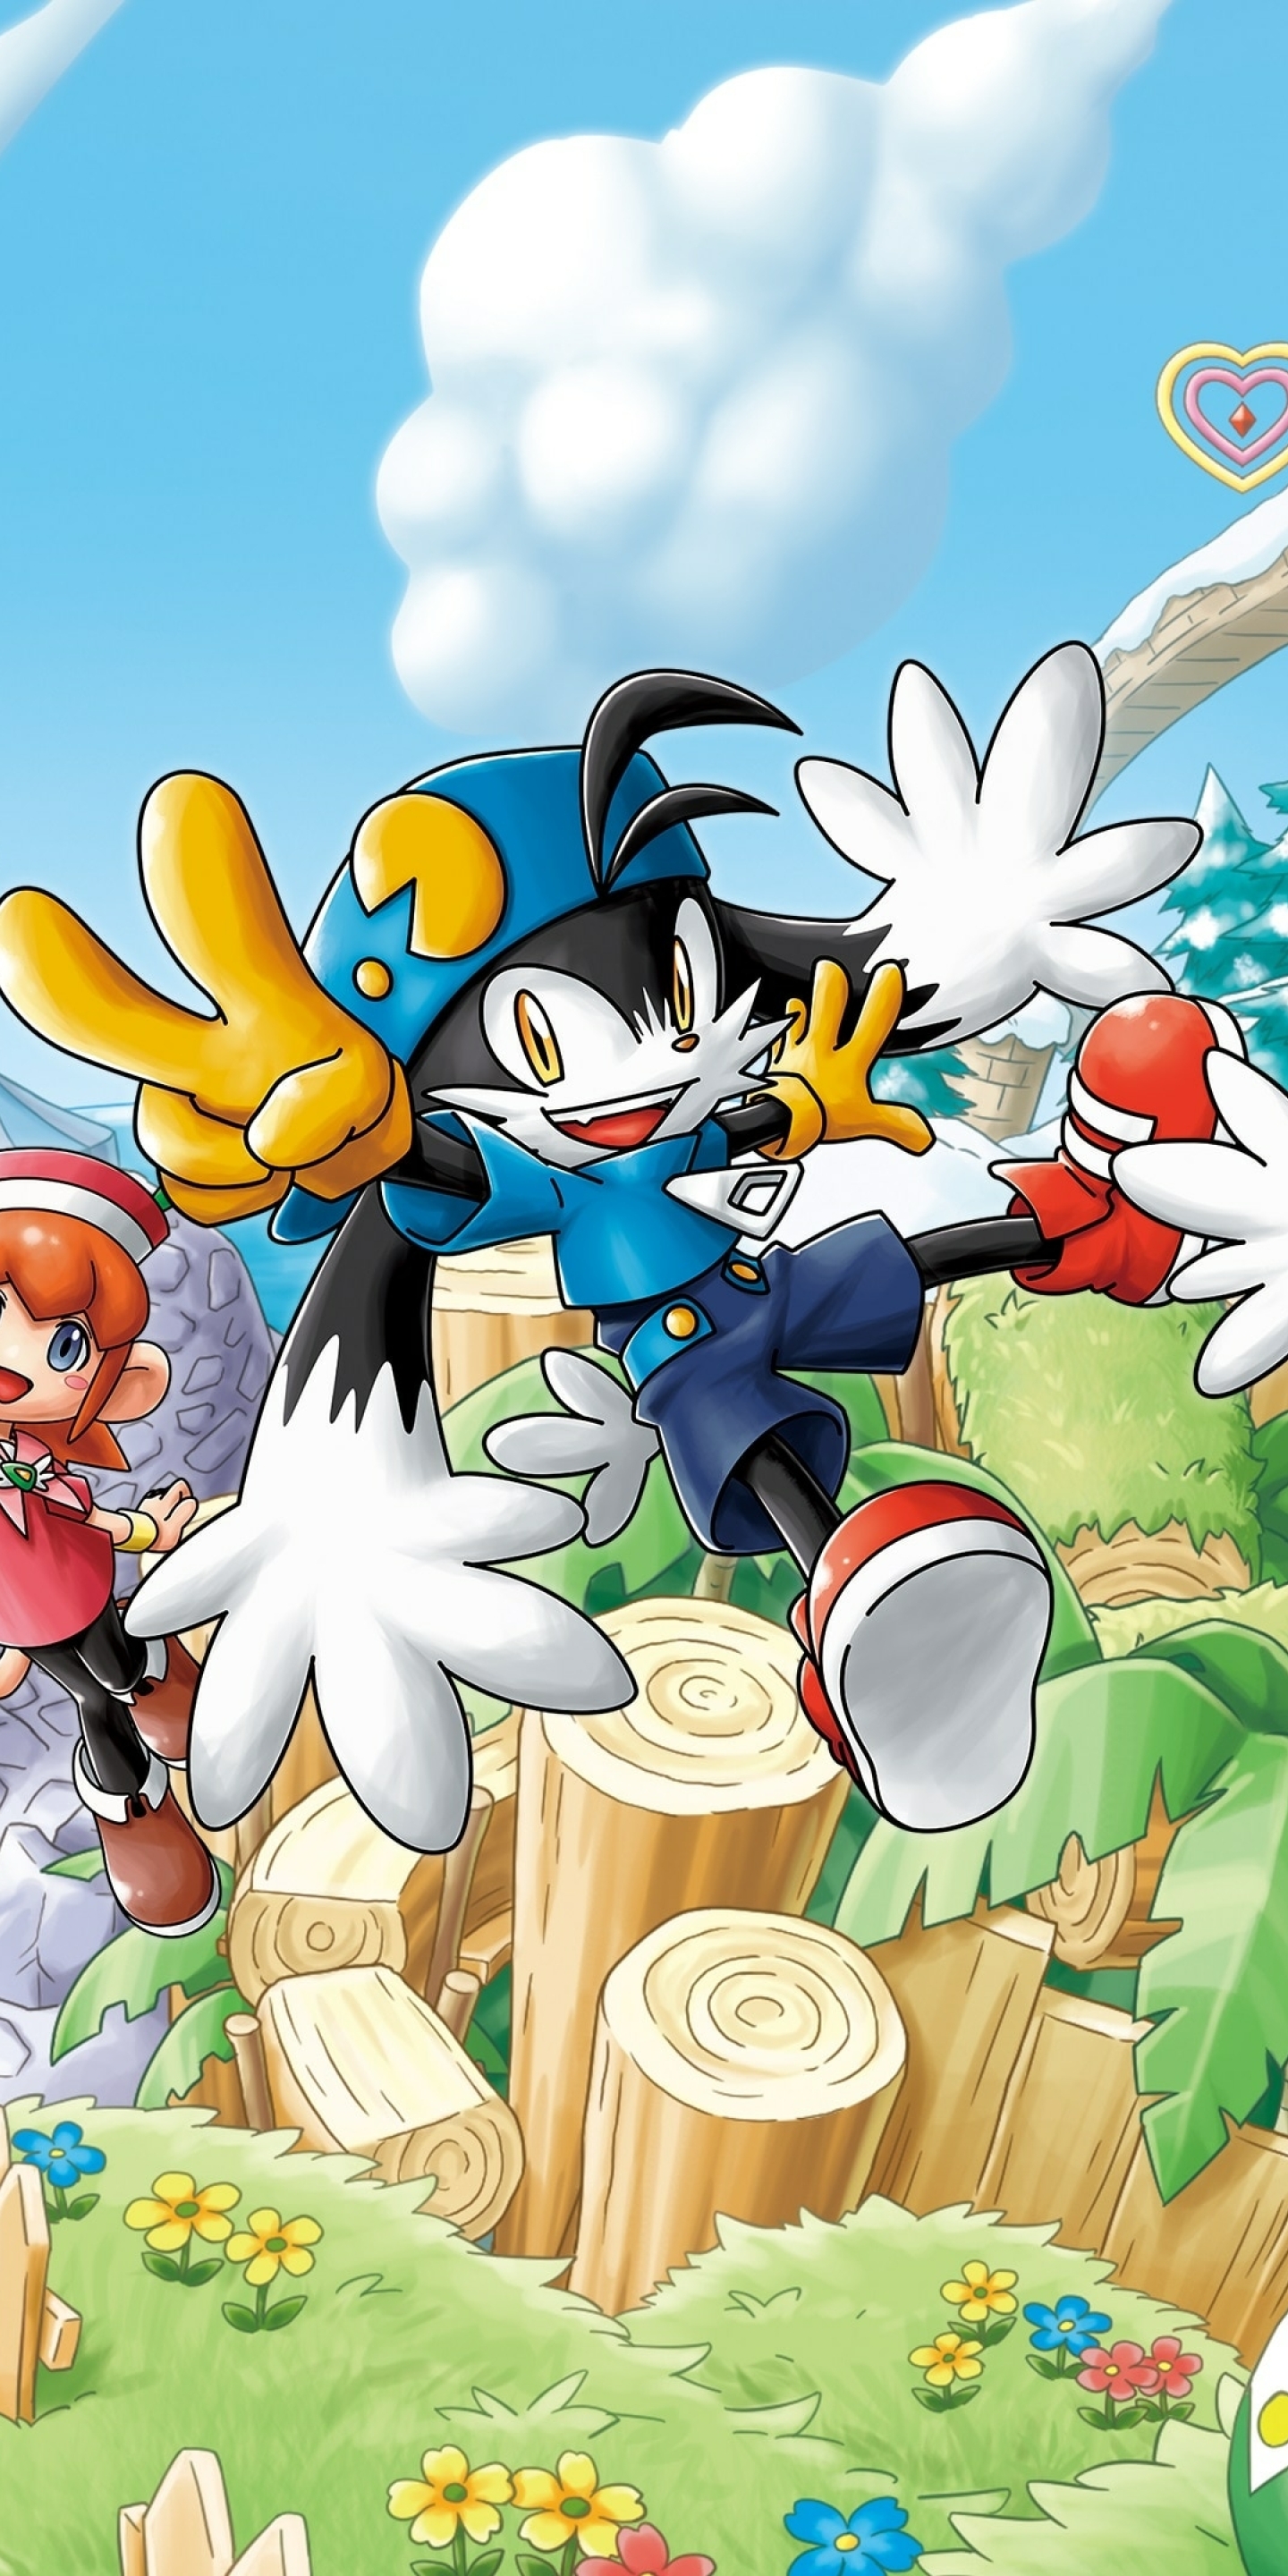 download klonoa reverie series for free